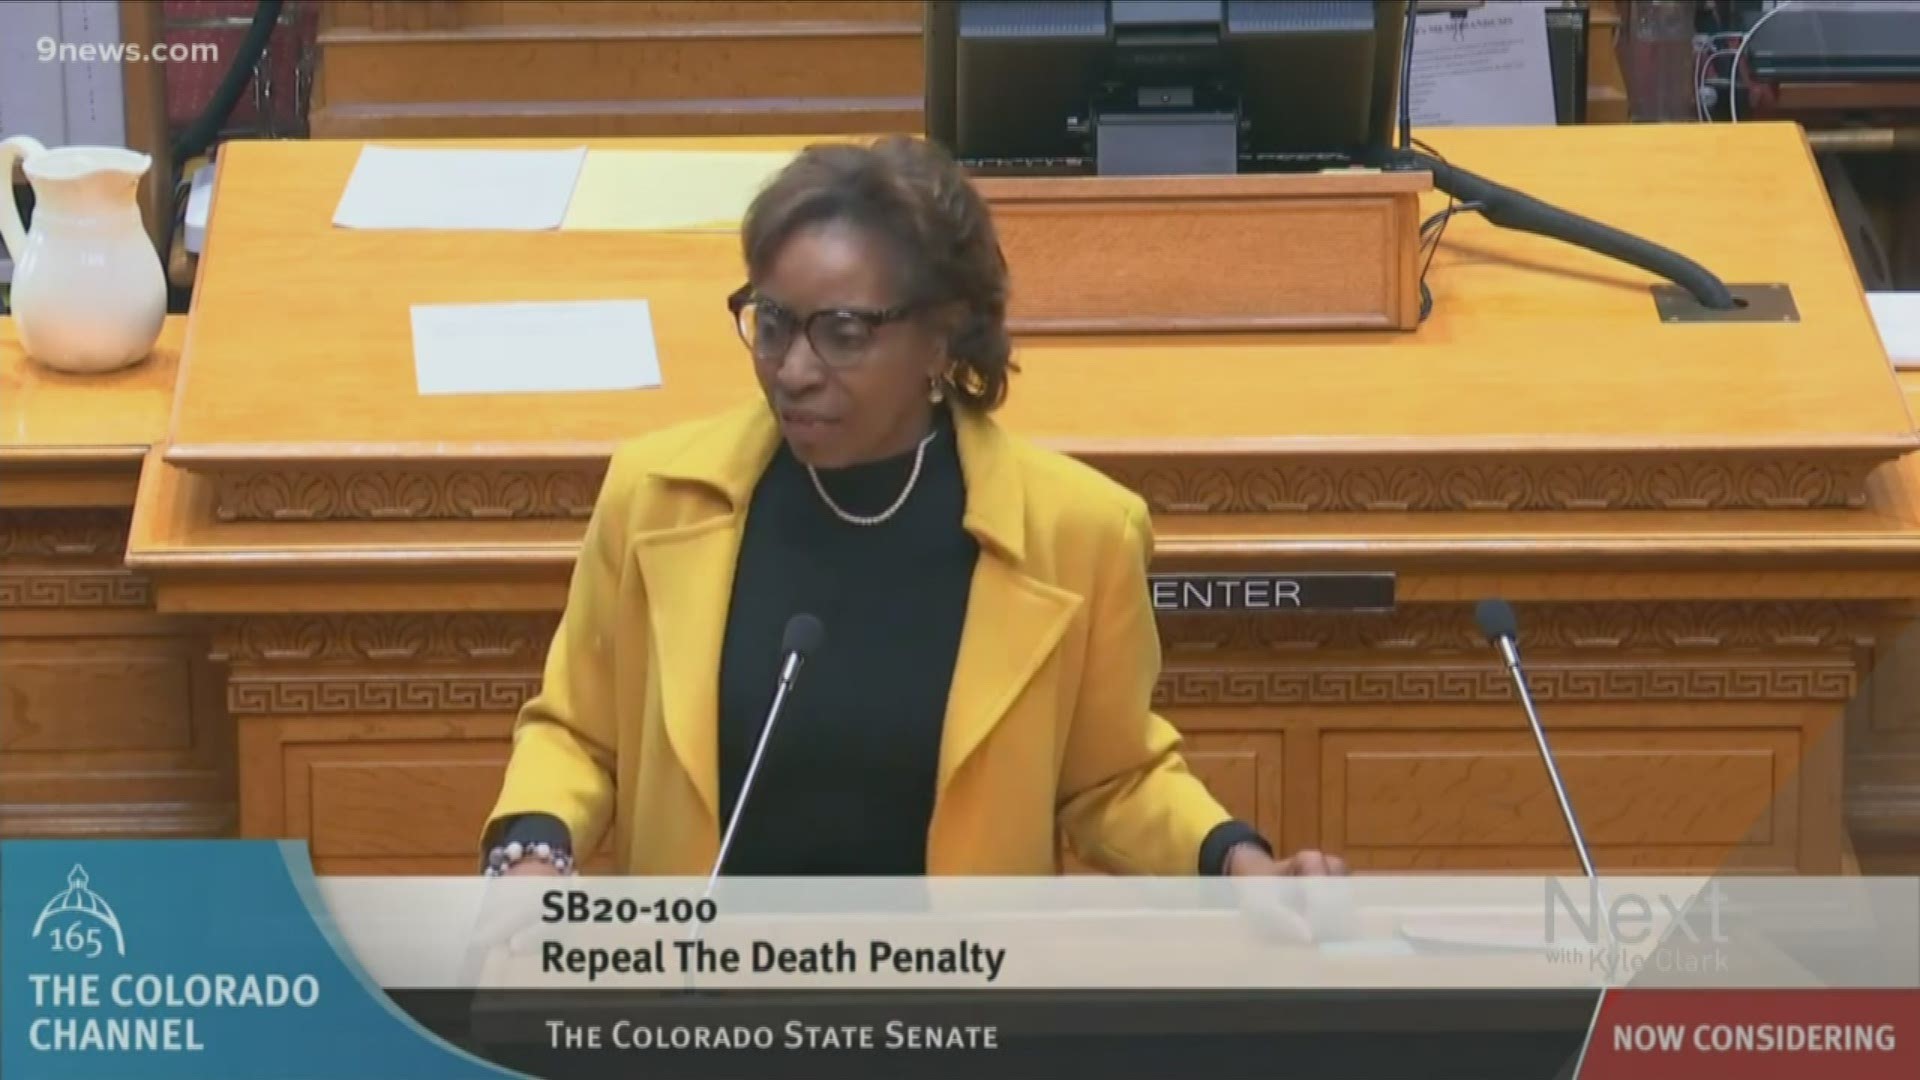 Colorado Sen. Rhonda Fields is again fighting a proposal to repeal the state's death penalty.